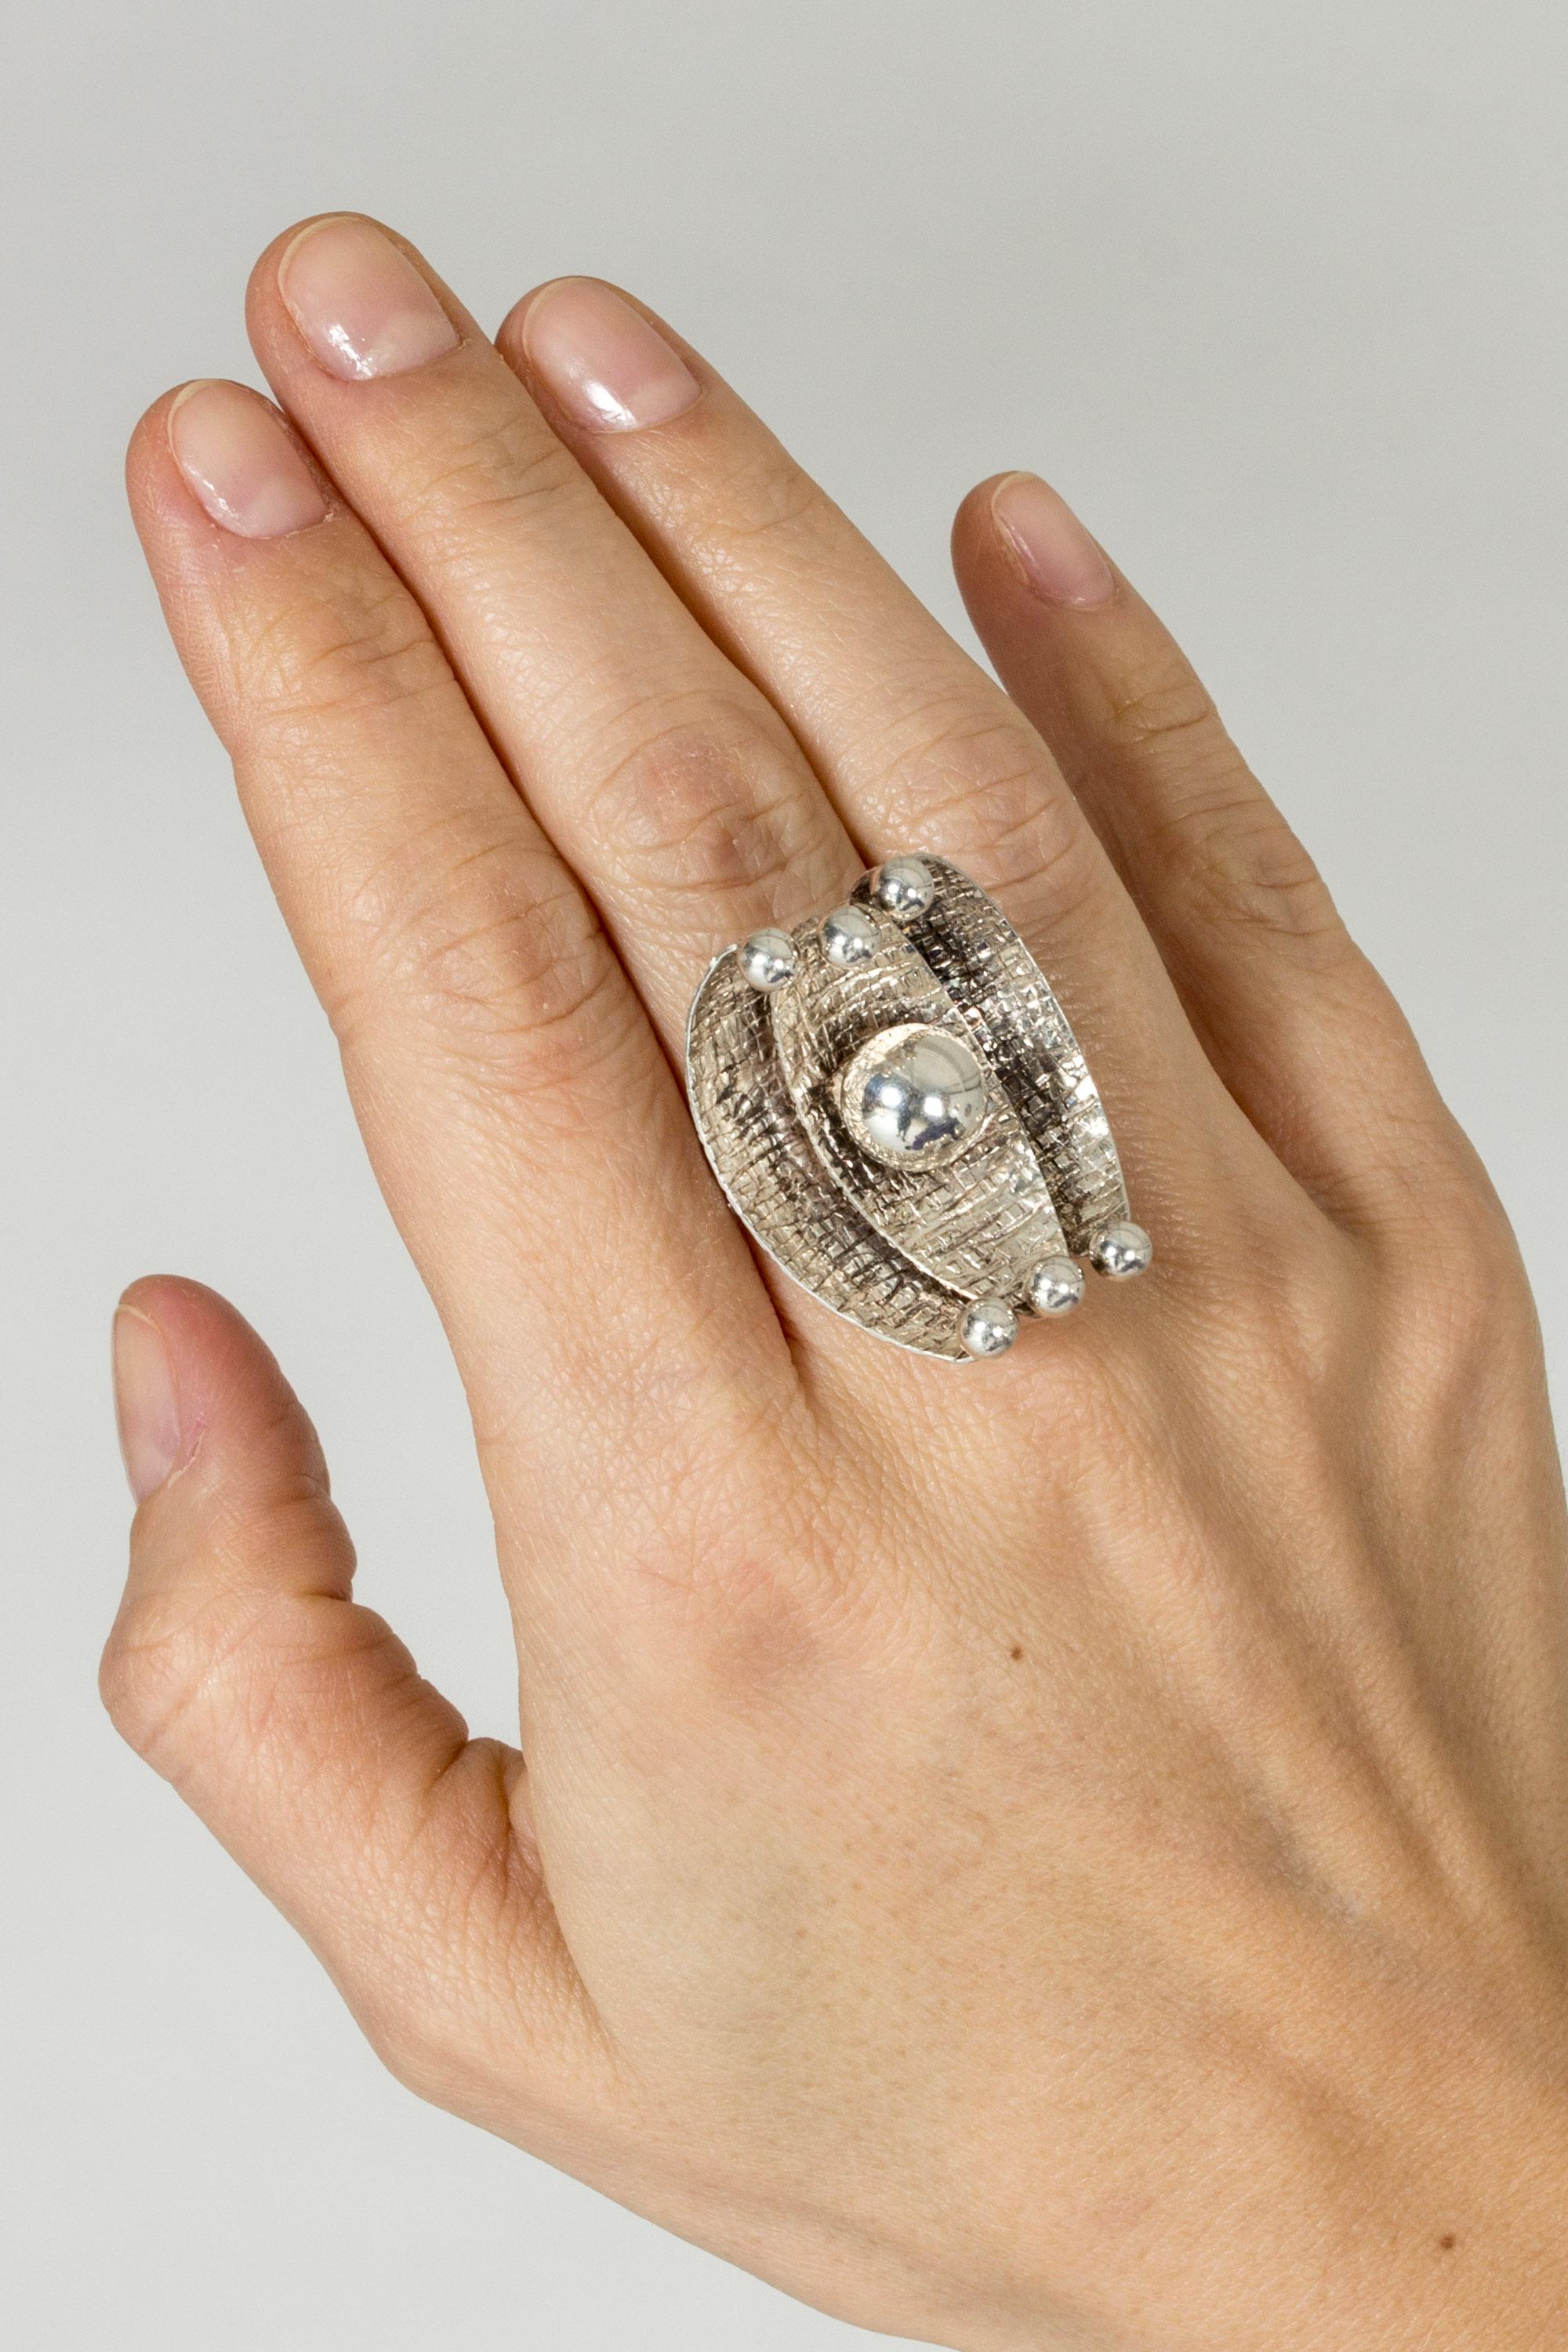 Amazing silver ring by Elis Kauppi, in an imaginative, oversized podlike design. The silver is embossed with a pattern that reflects light beautifully. Silver ball in the center.